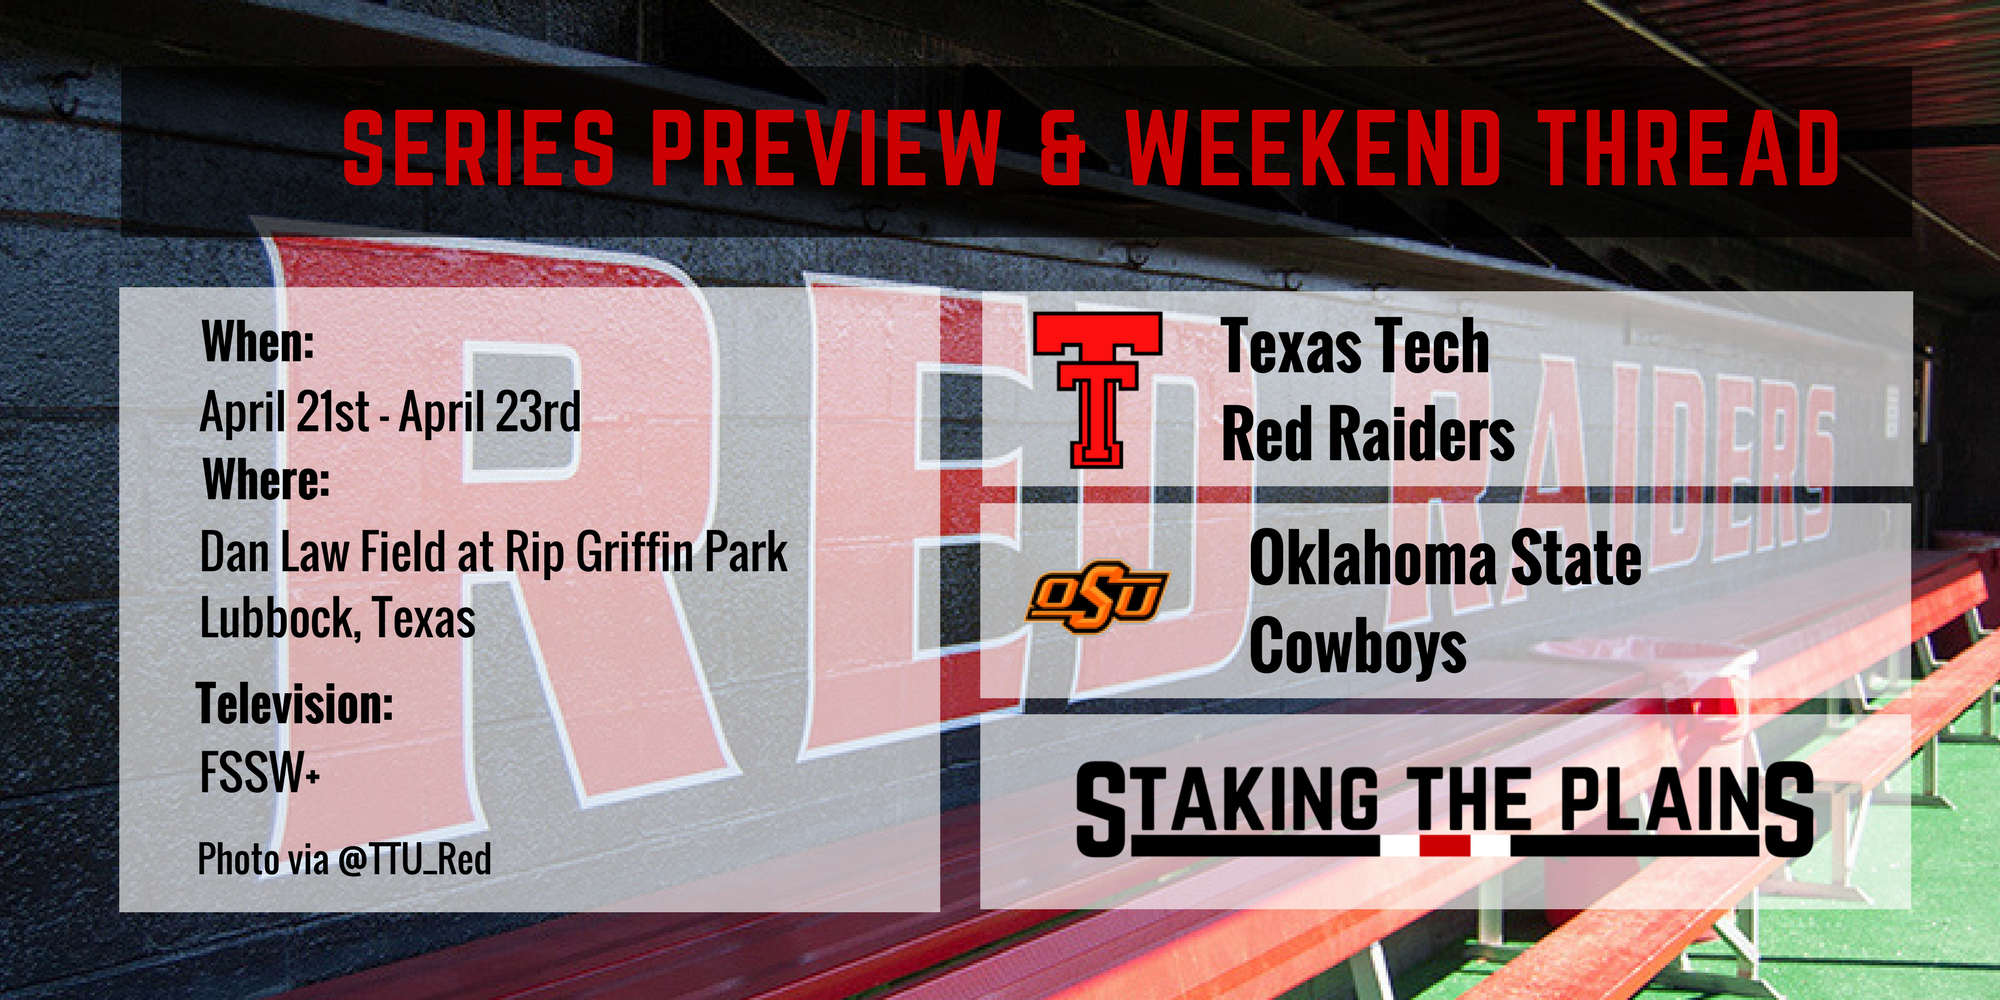 Series Preview and Weekend Thread: Oklahoma State vs. Texas Tech